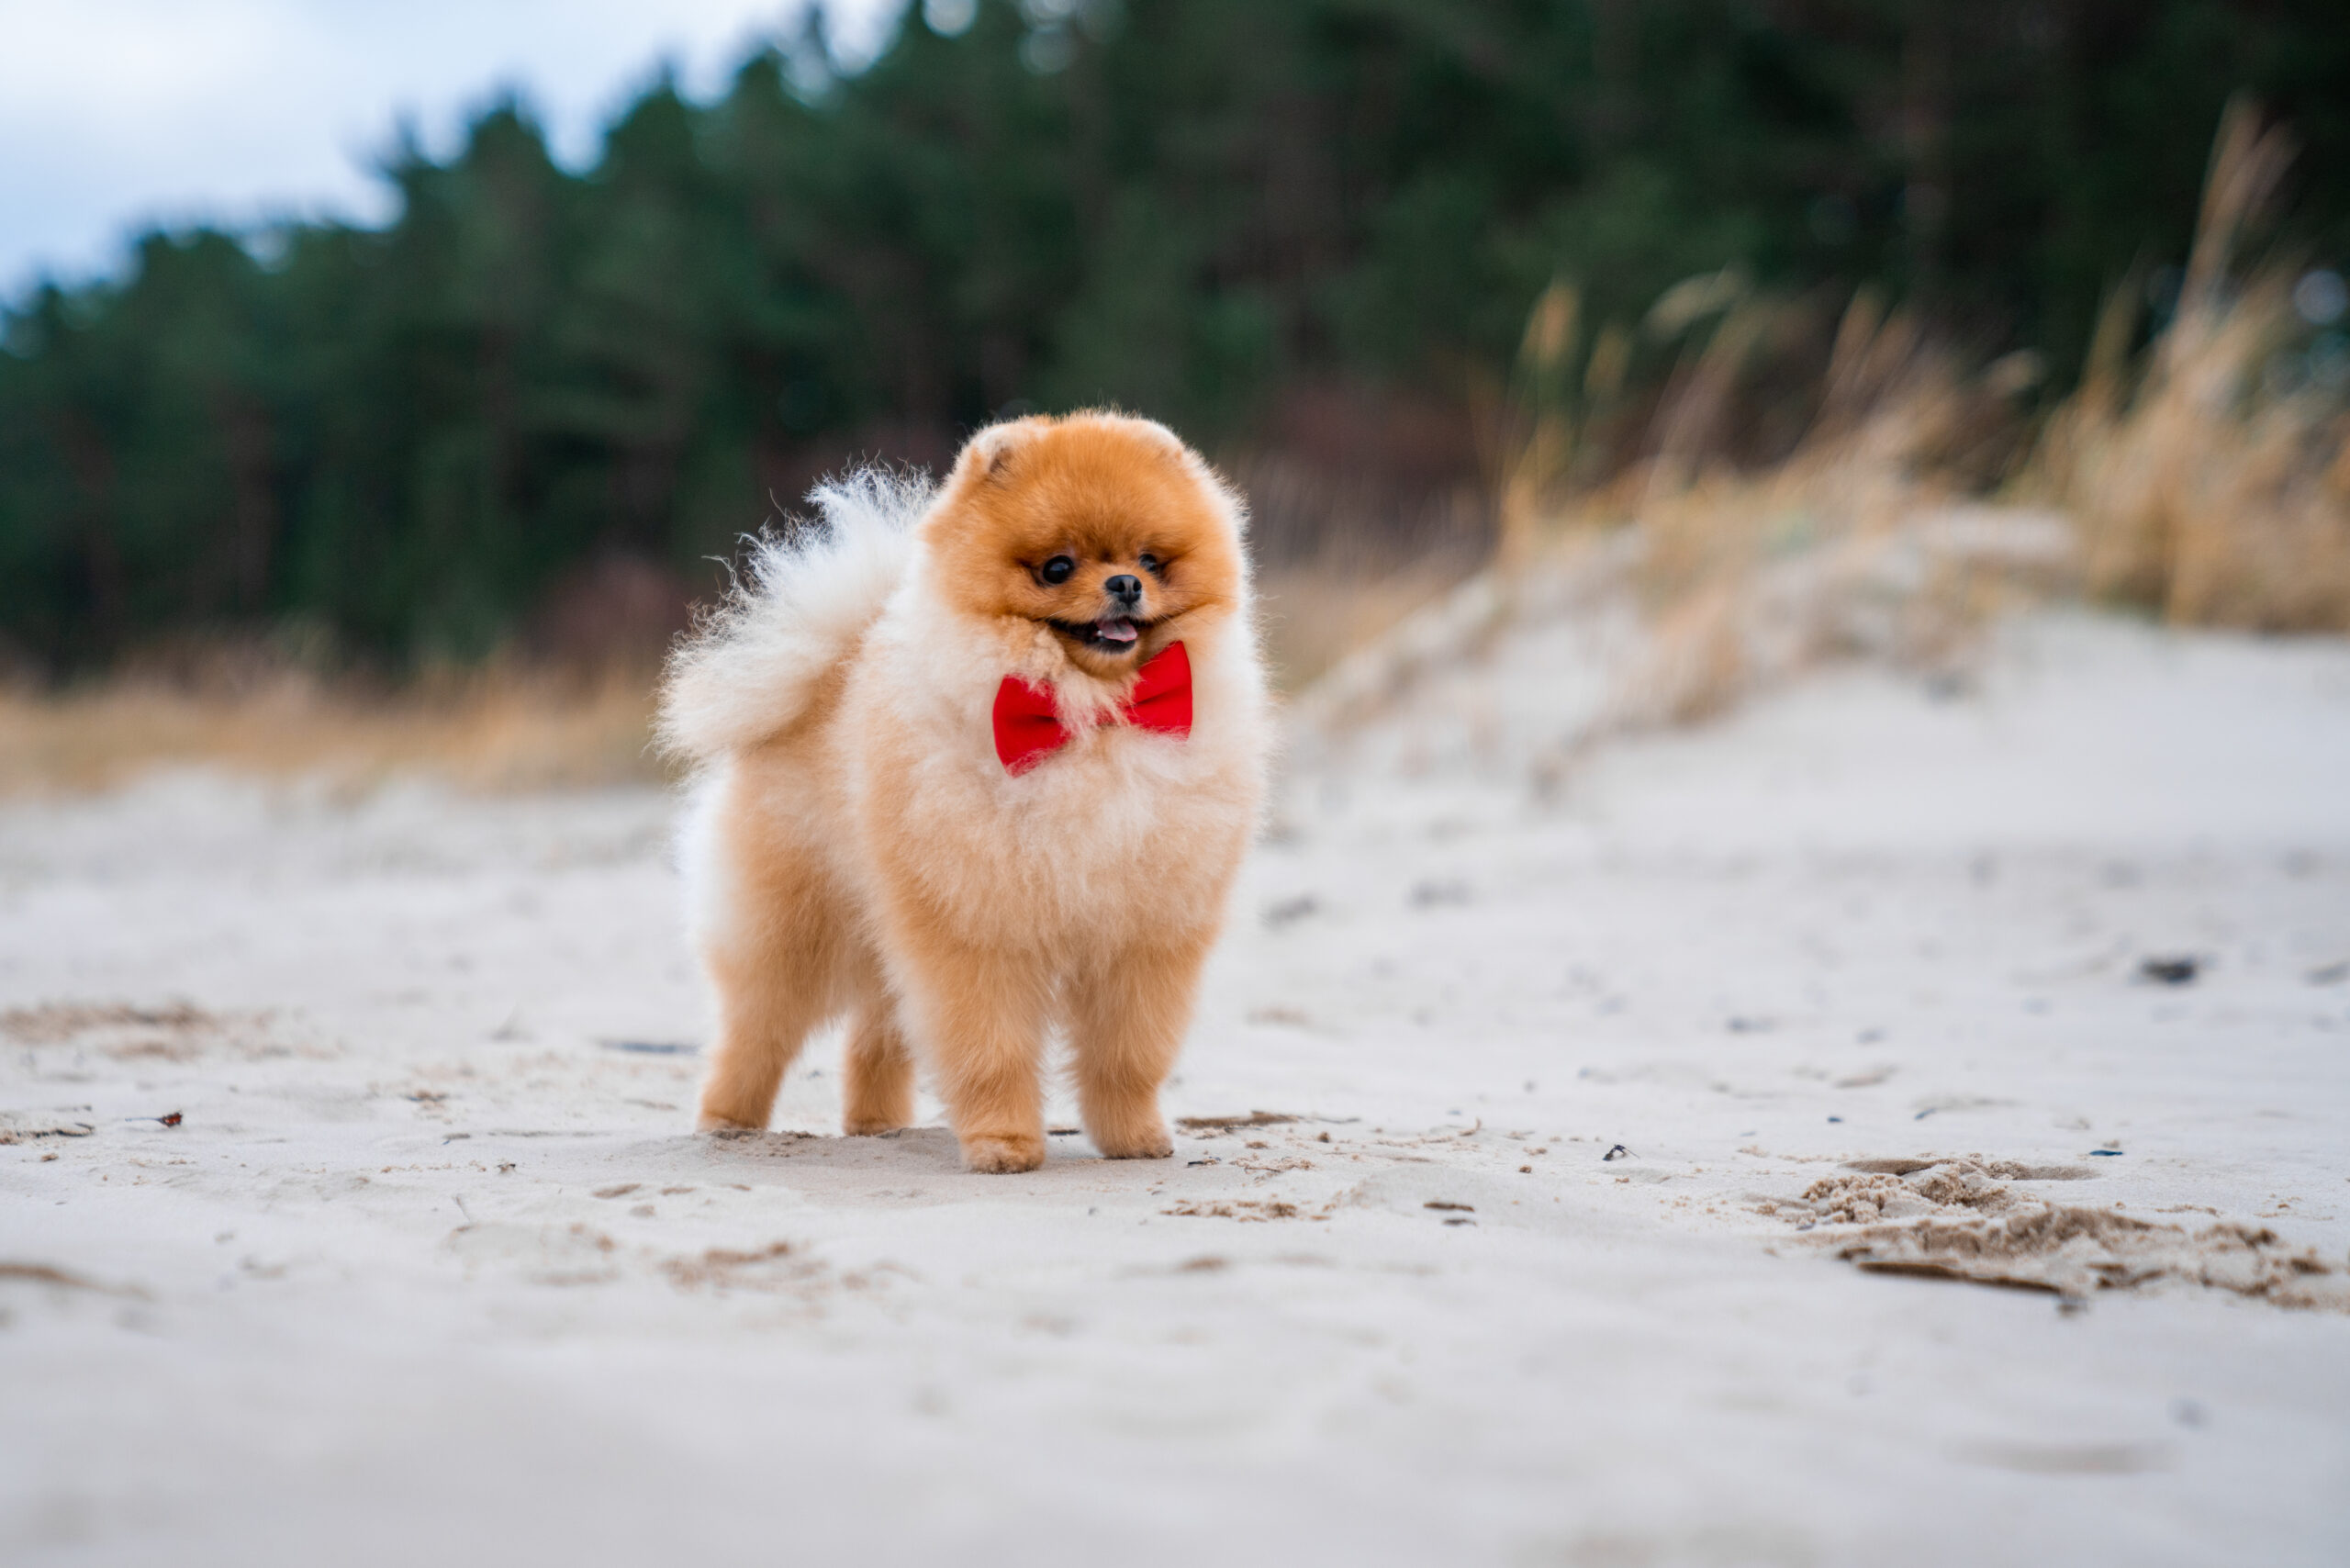 Adorable pomeranian spitz dog with a red bow having fun and running on the beach